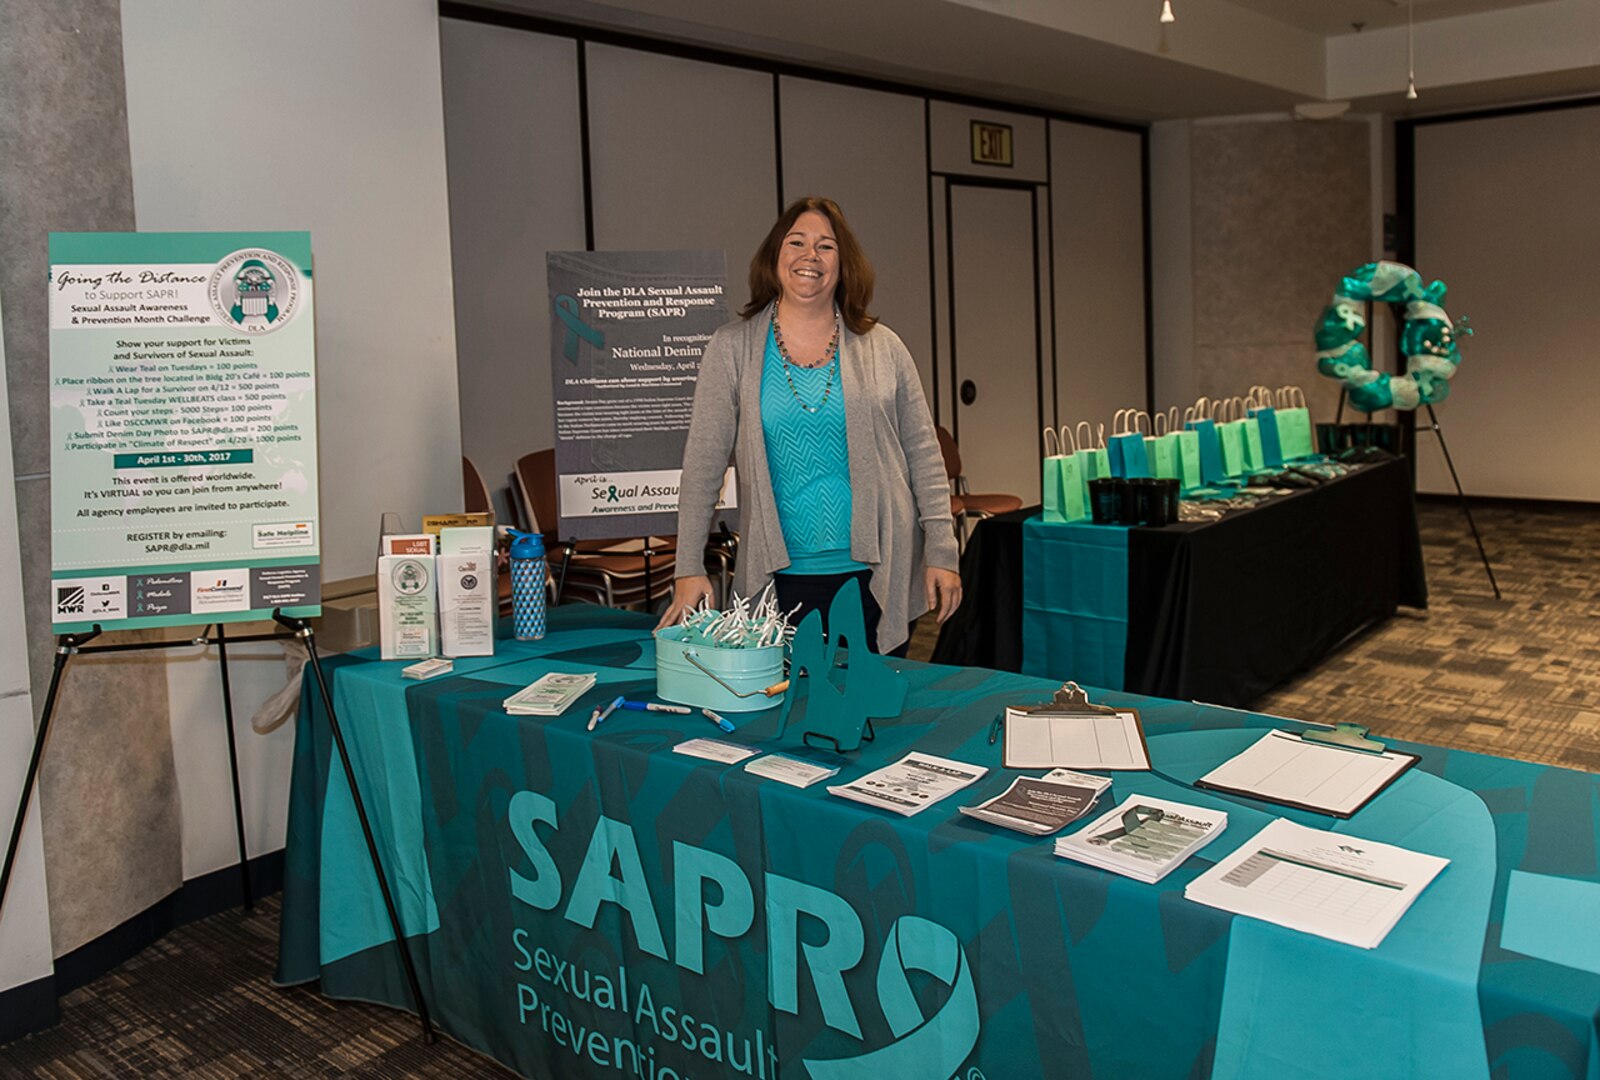 Defense Supply Center Columbus hosted an information fair to kick off Sexual Assault Awareness and Prevention Month. DLA Land and Maritime sexual assault response coordinator Shari Murnahan helped organize the April 5 event to promote activities taking place during the month at DSCC.